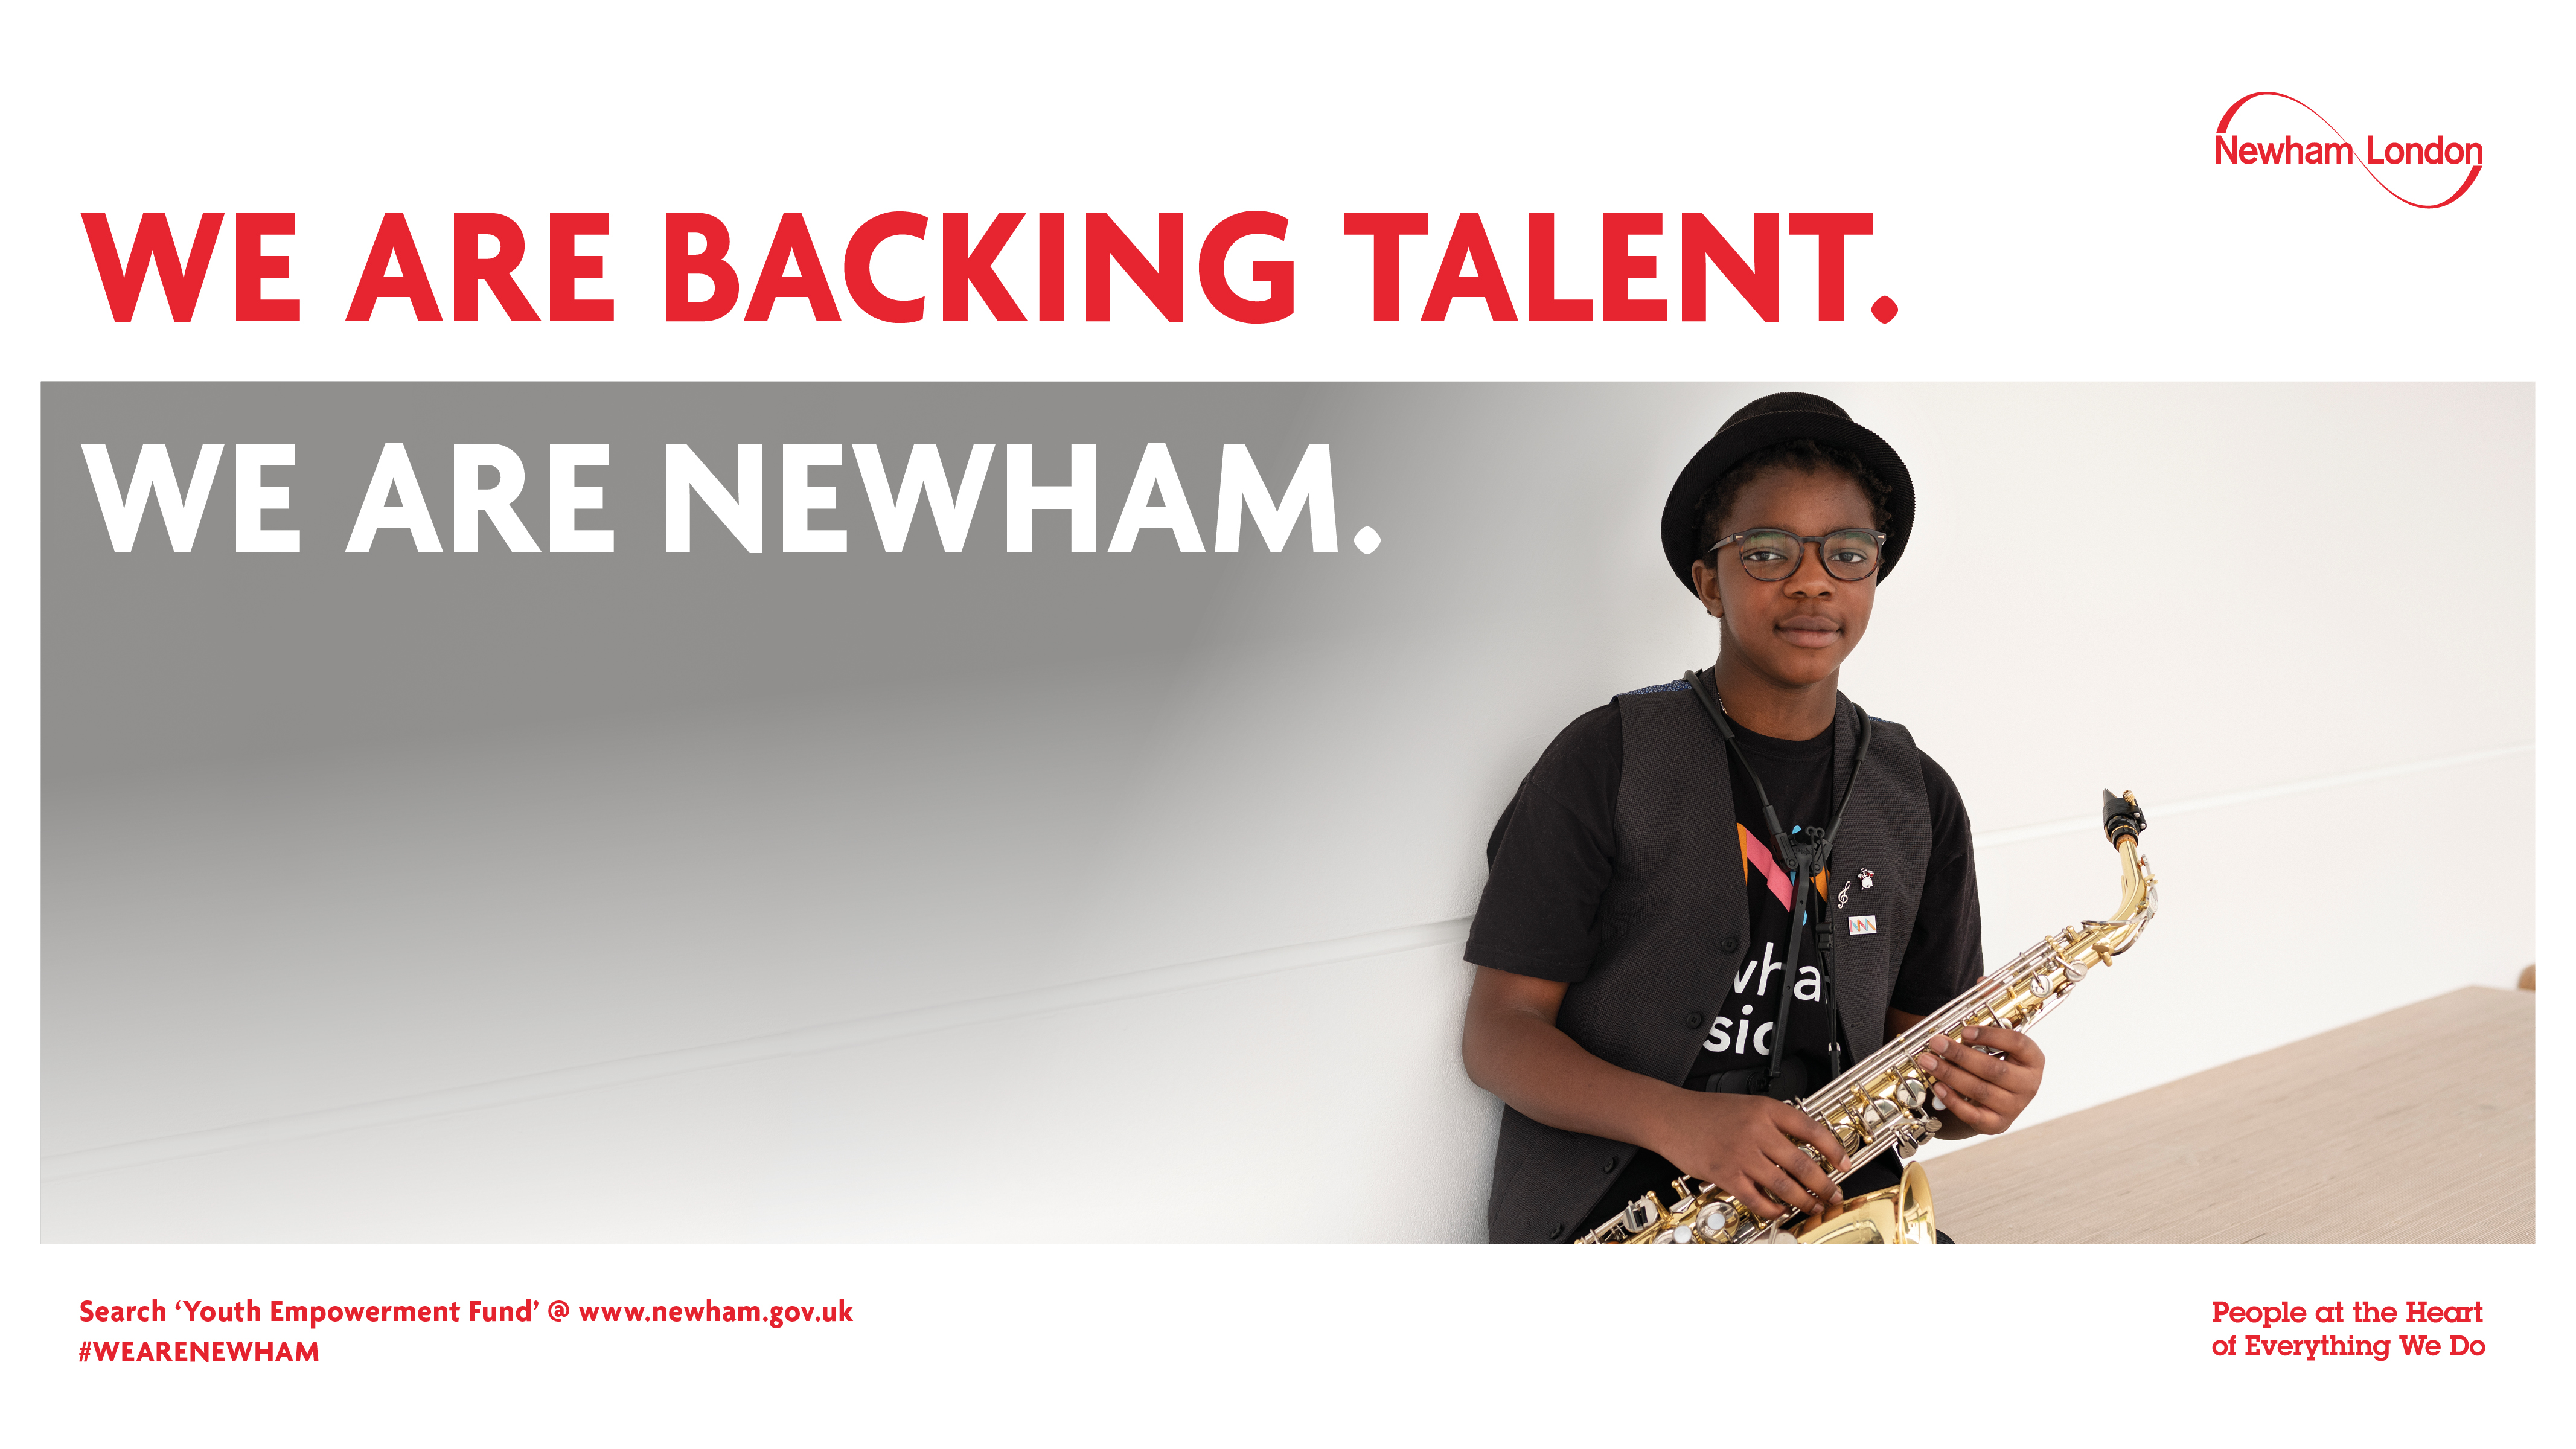 We are backing talent. We are Newham image